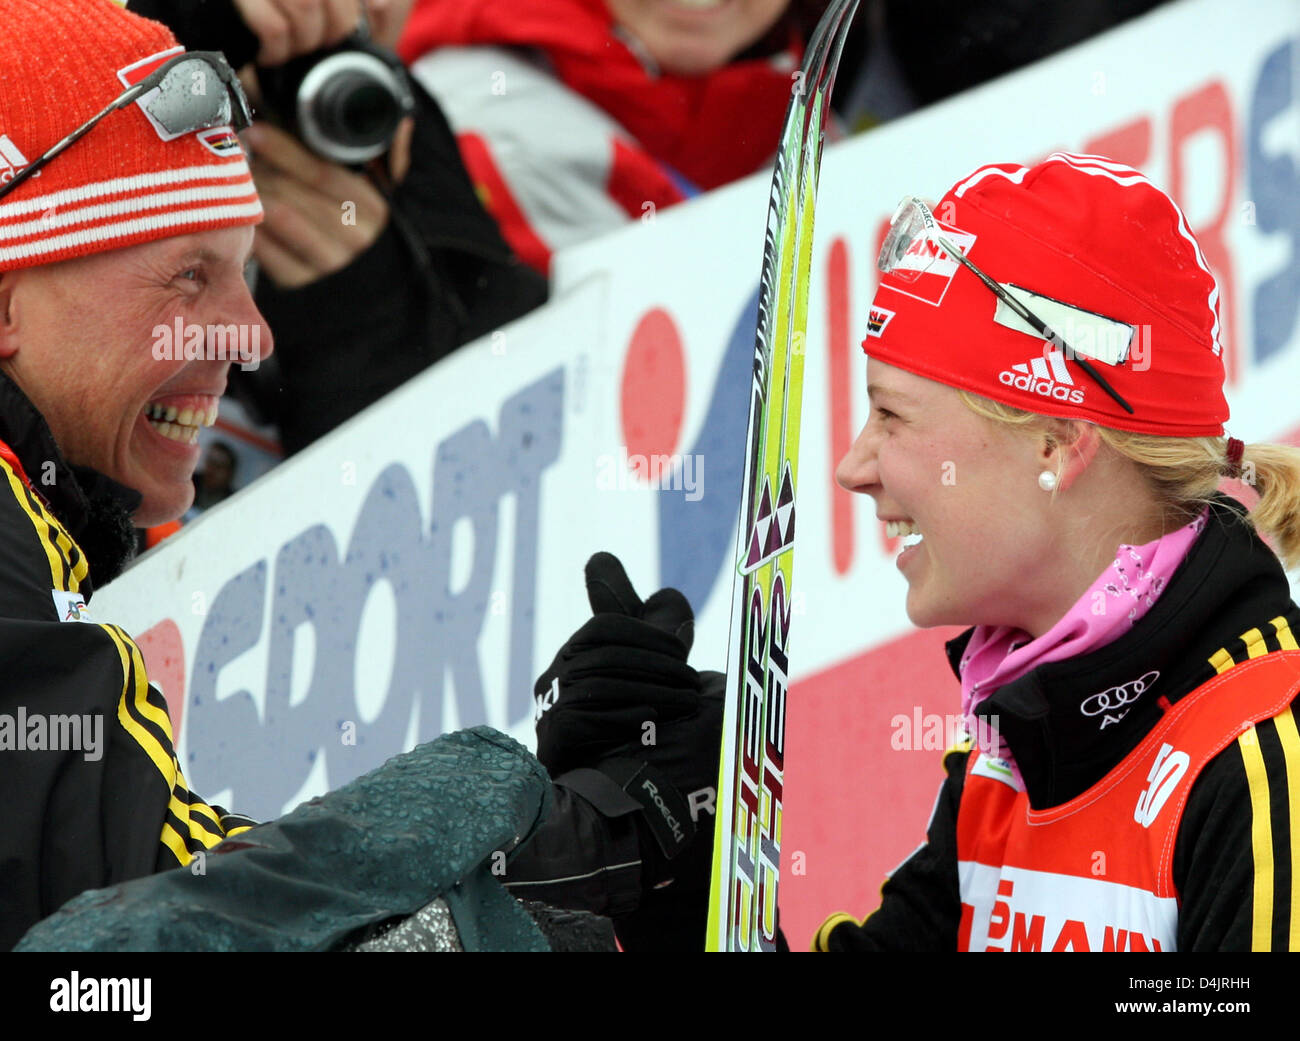 Ismo Haemaelaenen,  head coach for cross-country skiing, congratulates Miriam Goessner after the women?s cross-country skiing relay competition at the FIS Nordic World Ski Championships in Liberec, Czech Republic, 26 February 2009. Photo: Kay Nietfeld Stock Photo